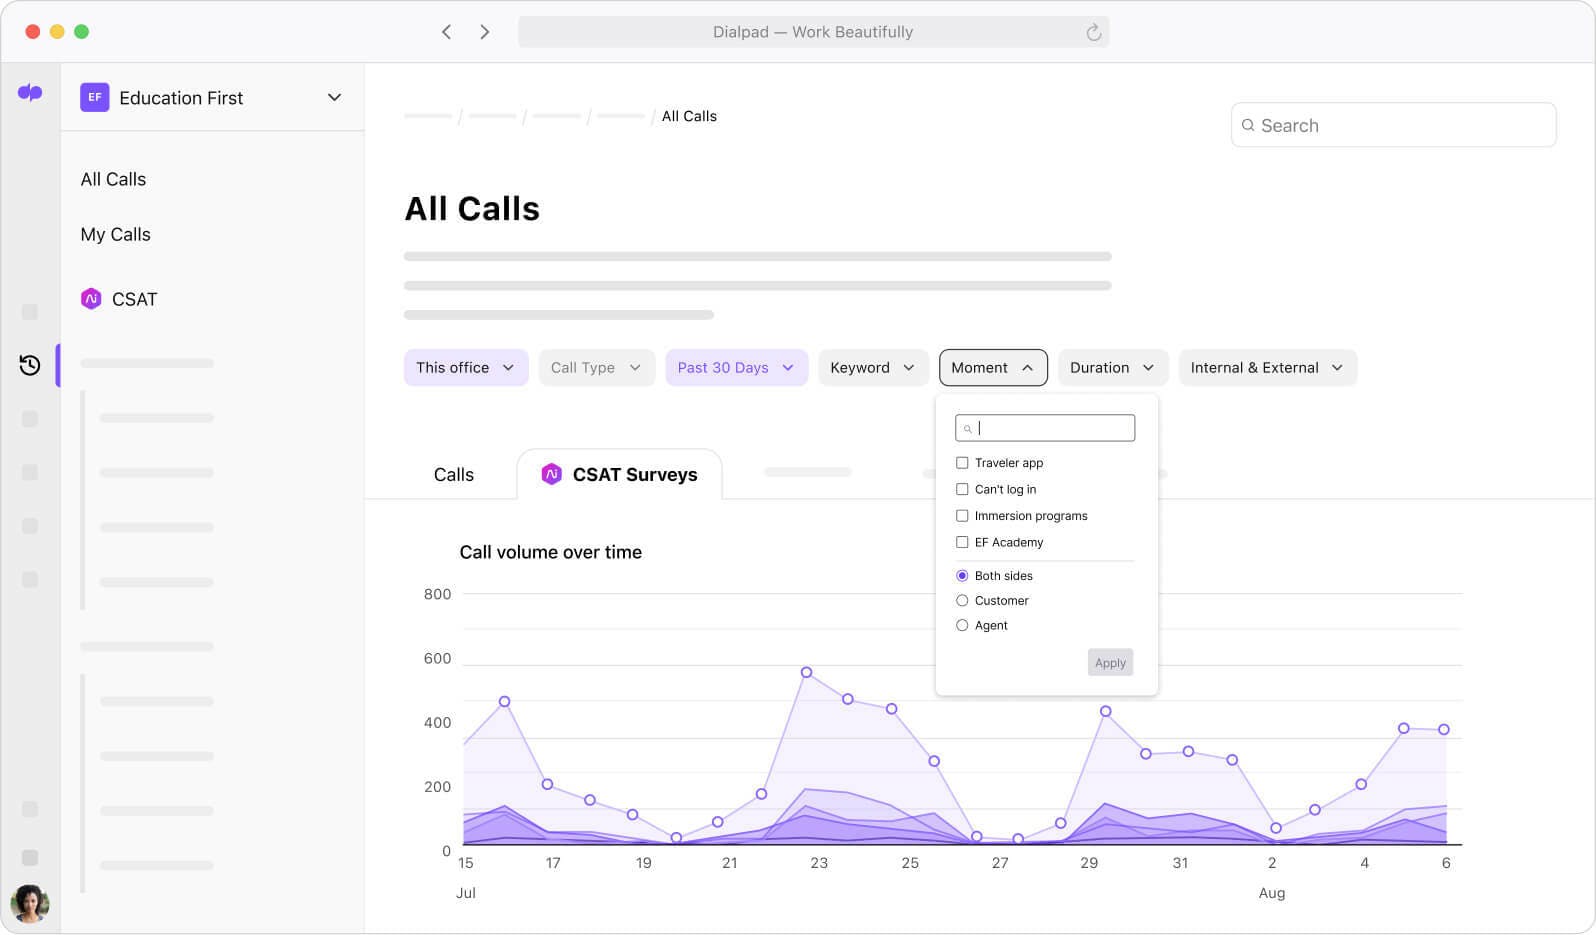 Screenshot of Dialpad Ais analytics tracking how often different topics come up in customer conversations